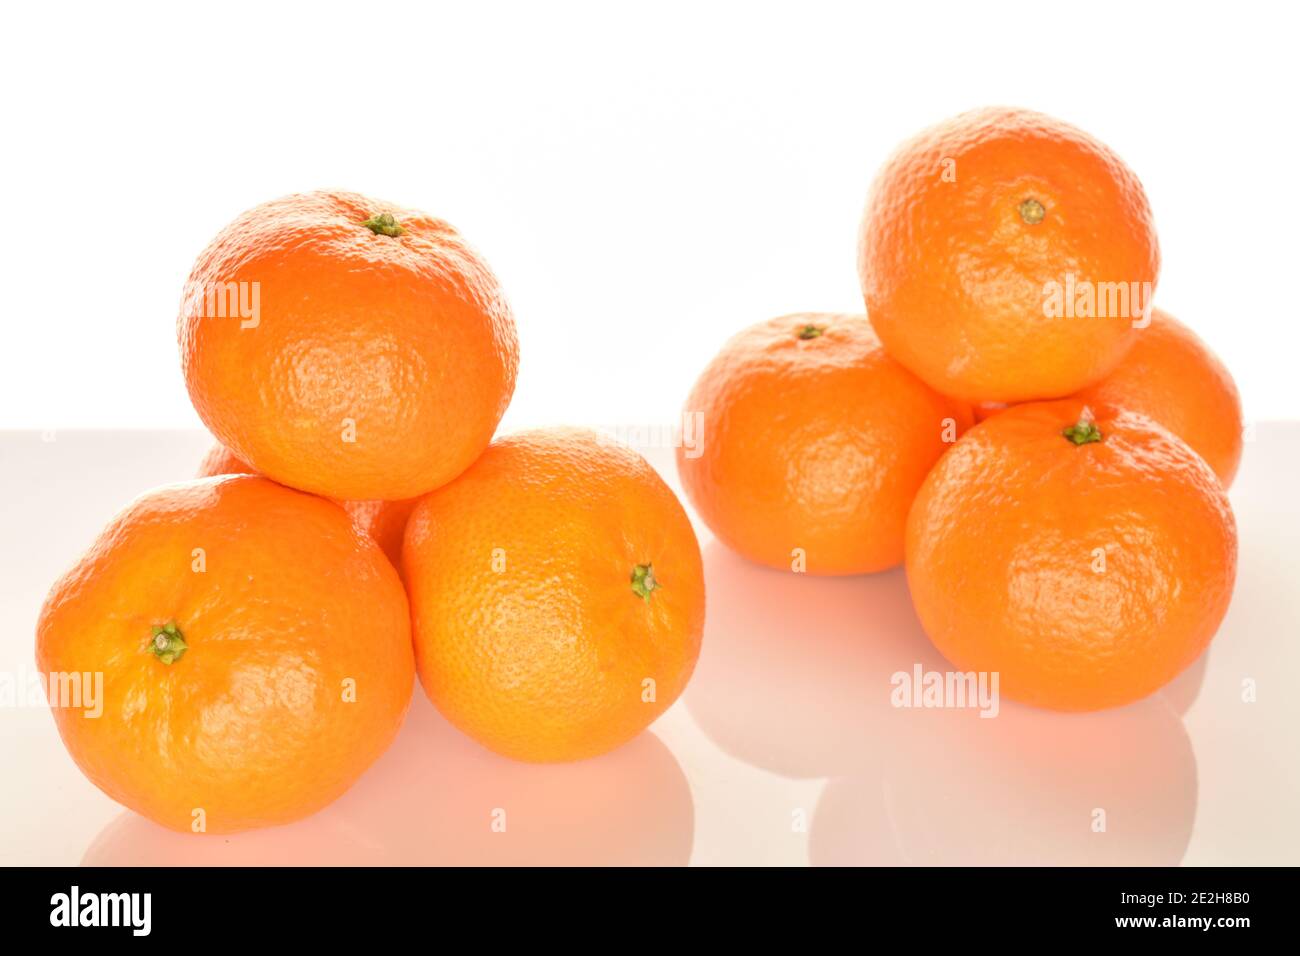 A few whole bright orange ripe juicy tangerines, on a white background. The nearest mandarin, in the foreground in focus. Stock Photo